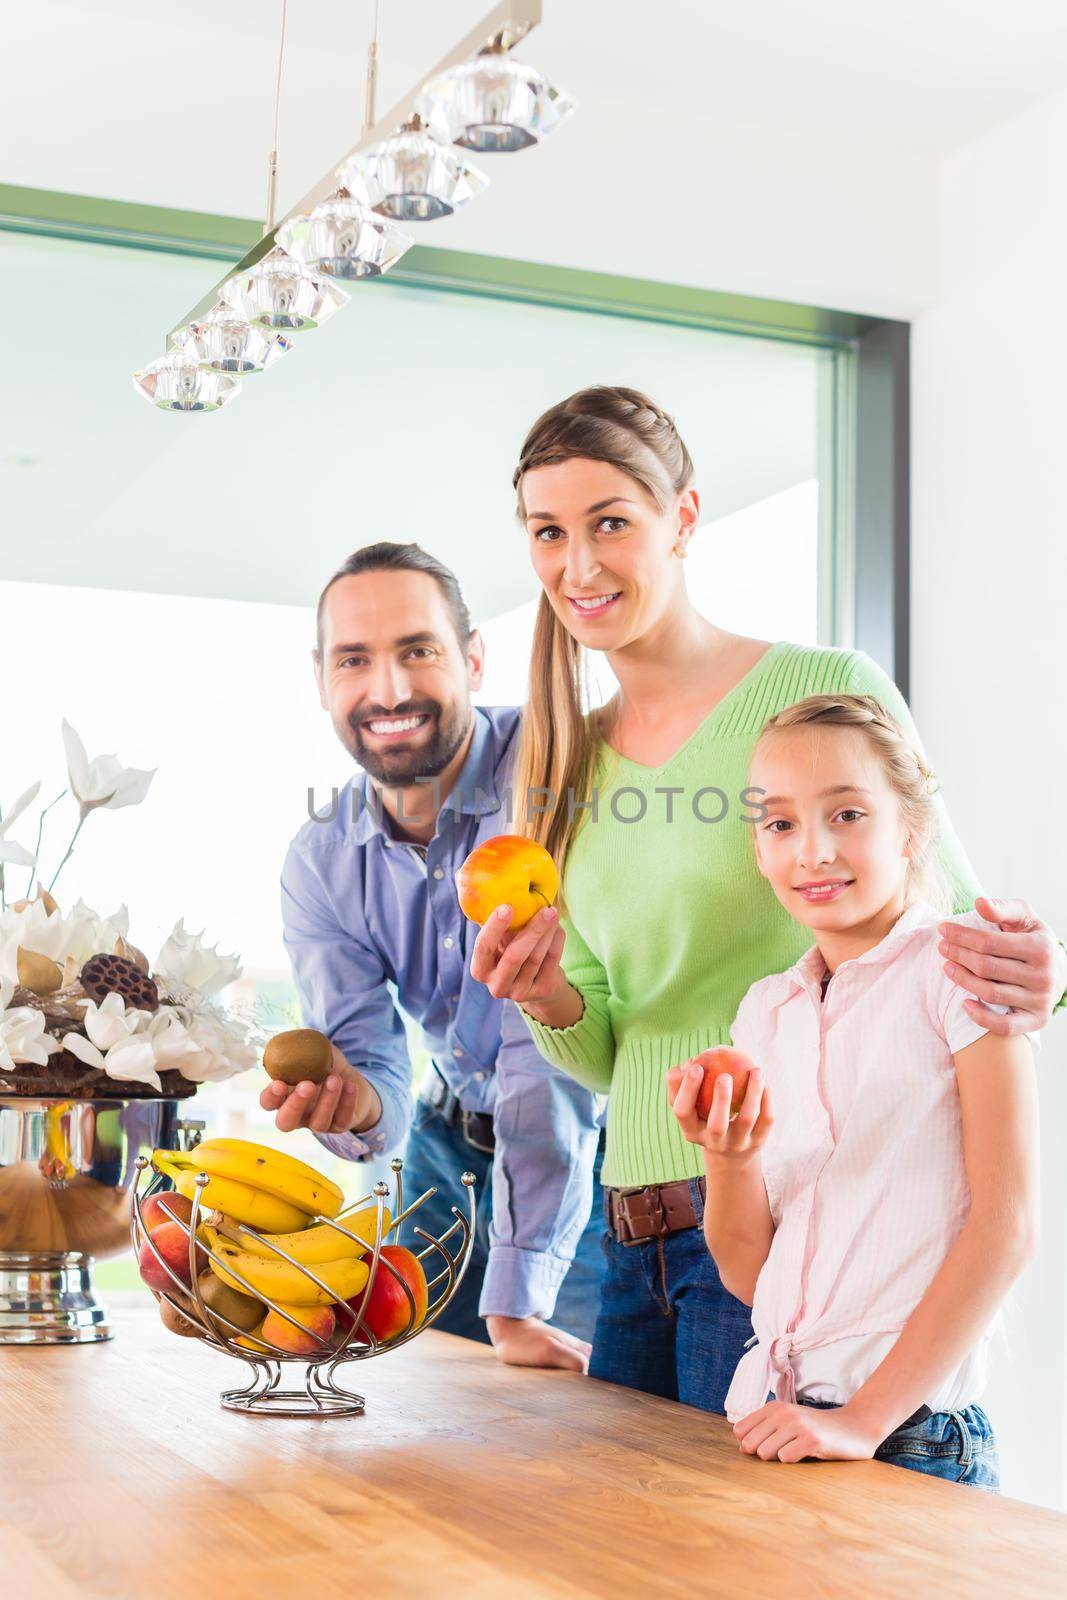 Mother, father, child picking fresh fruits for healthy living in home kitchen